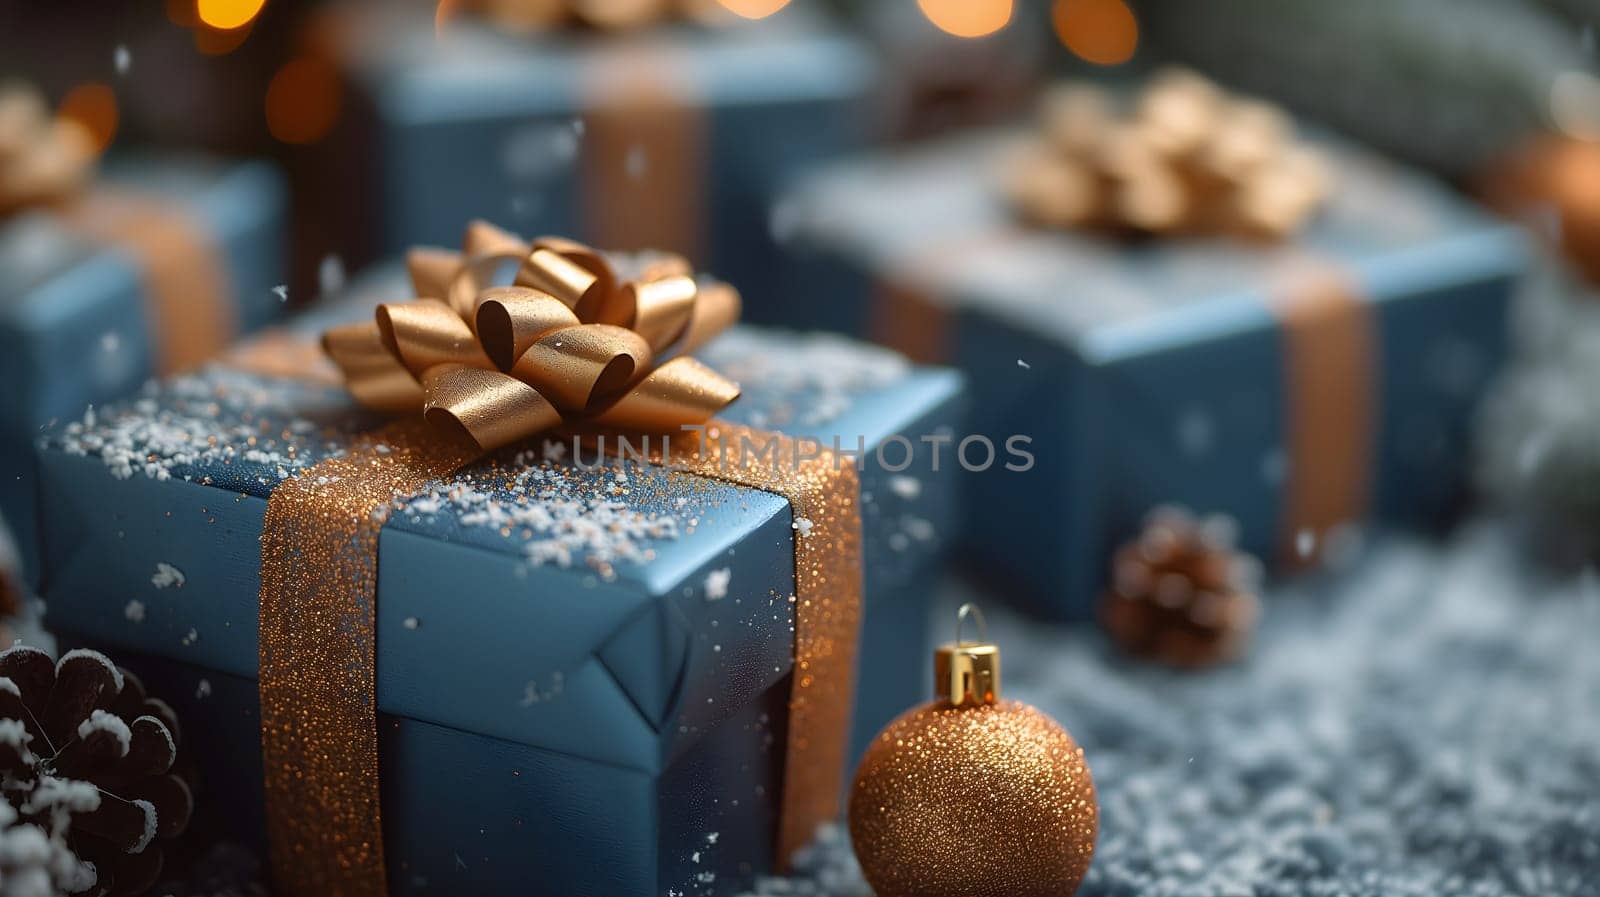 Blue Christmas gift boxes with a gold bow for holiday background. Neural network generated image. Not based on any actual scene or pattern.